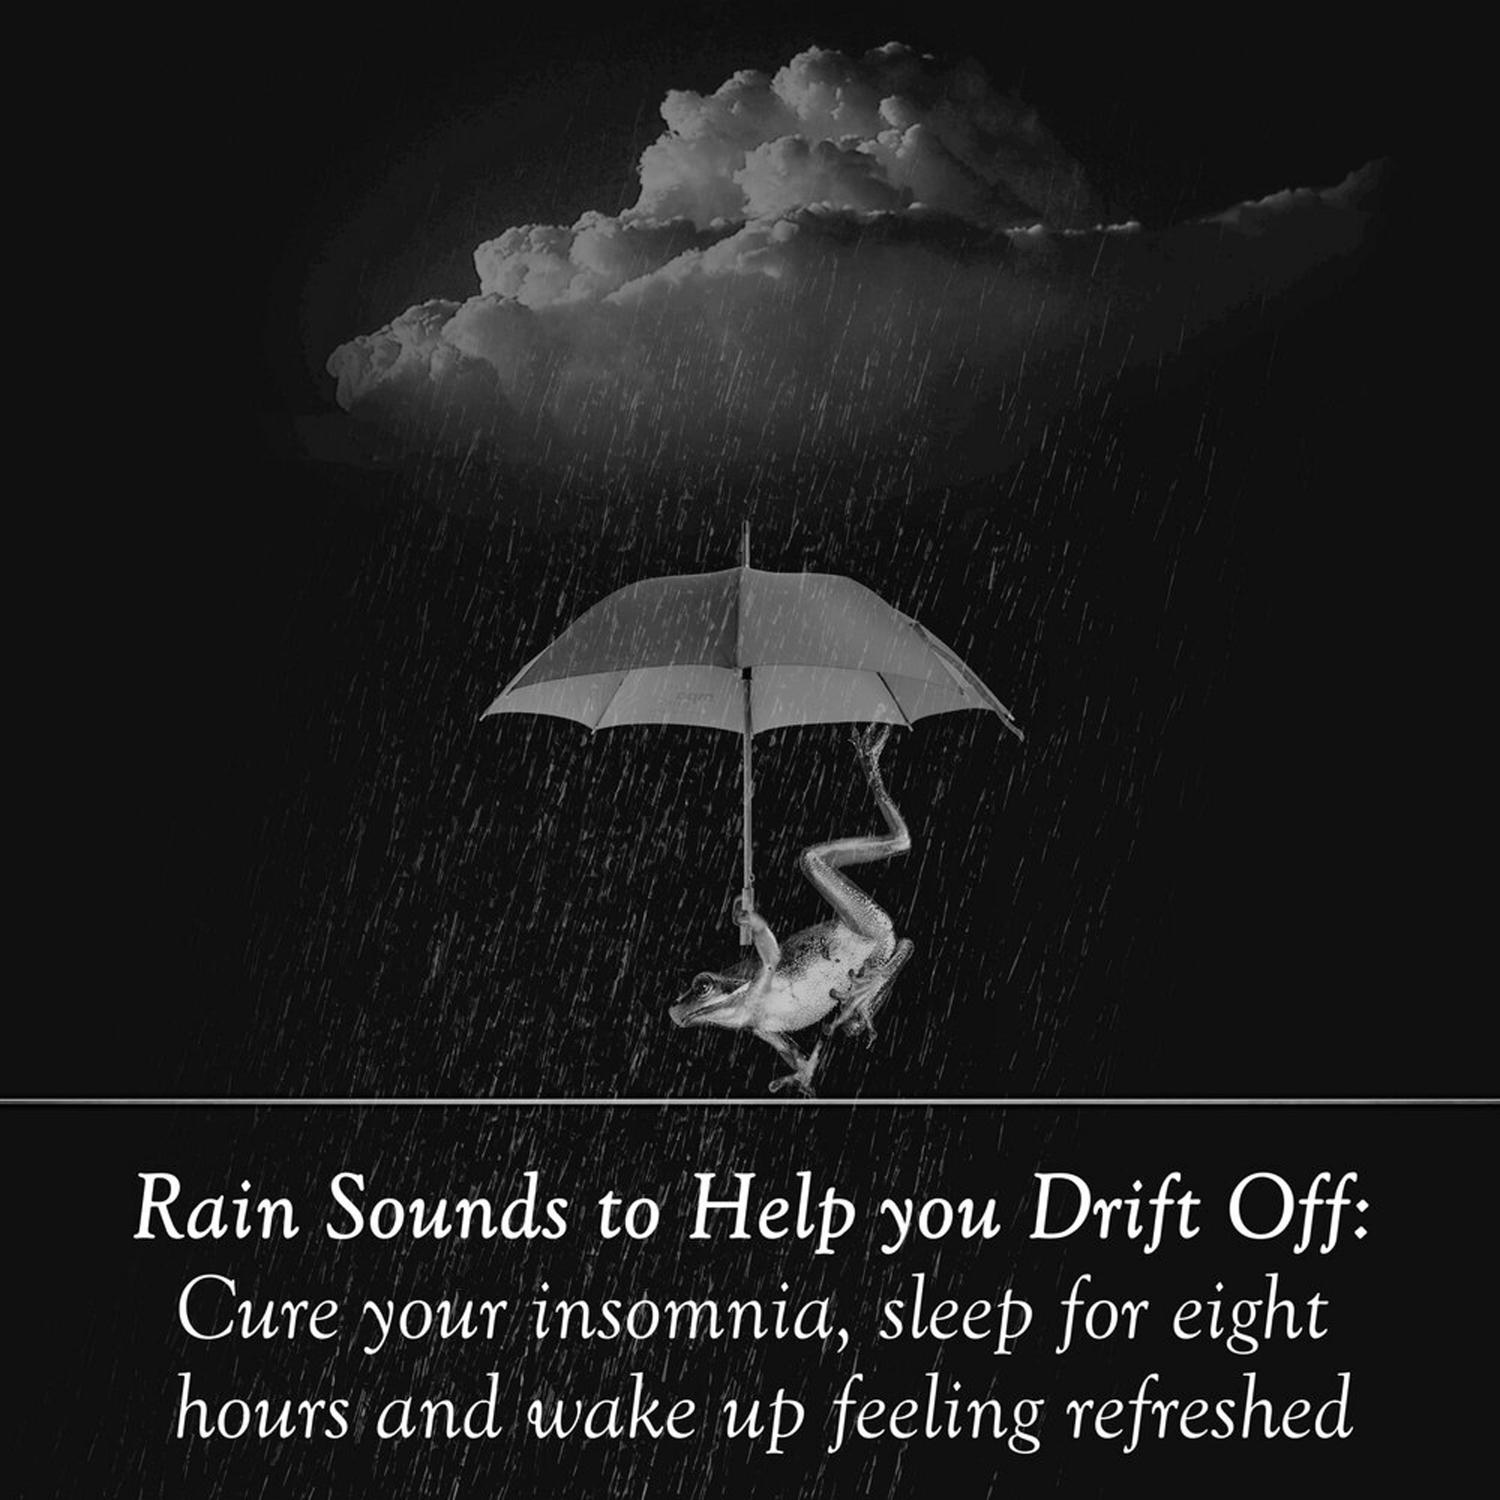 17 Rain Sounds to Help you Drift Off: Cure your insomnia, sleep for eight hours and wake up feeling refreshed